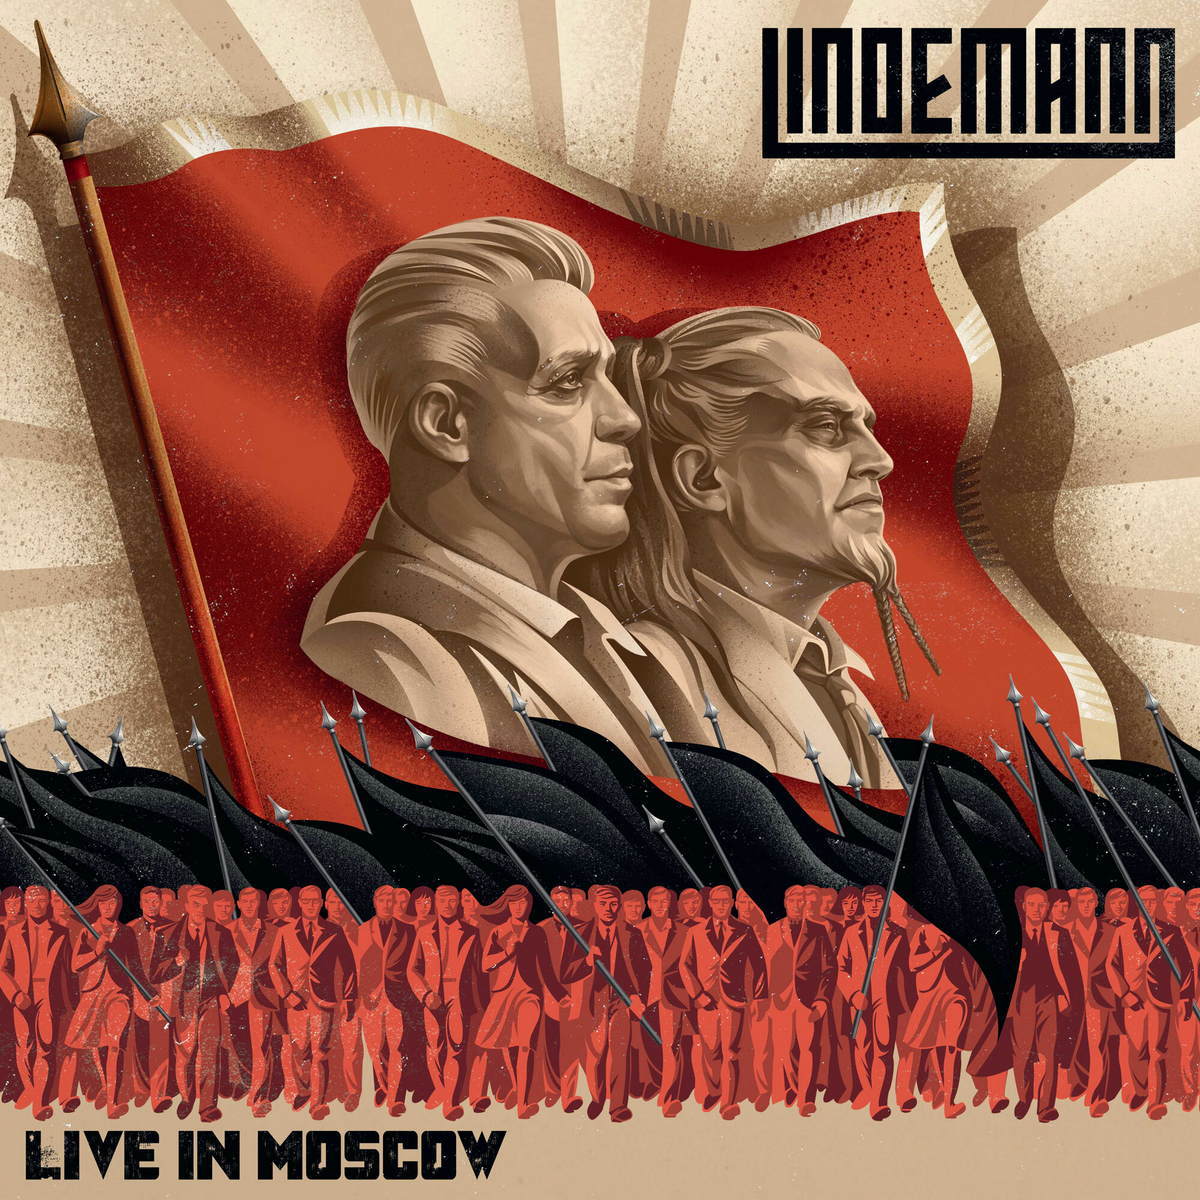 Рок Universal (Ger) Lindemann - Live in Moscow (2LP, Black Vinyl) рок universal ger lindemann f